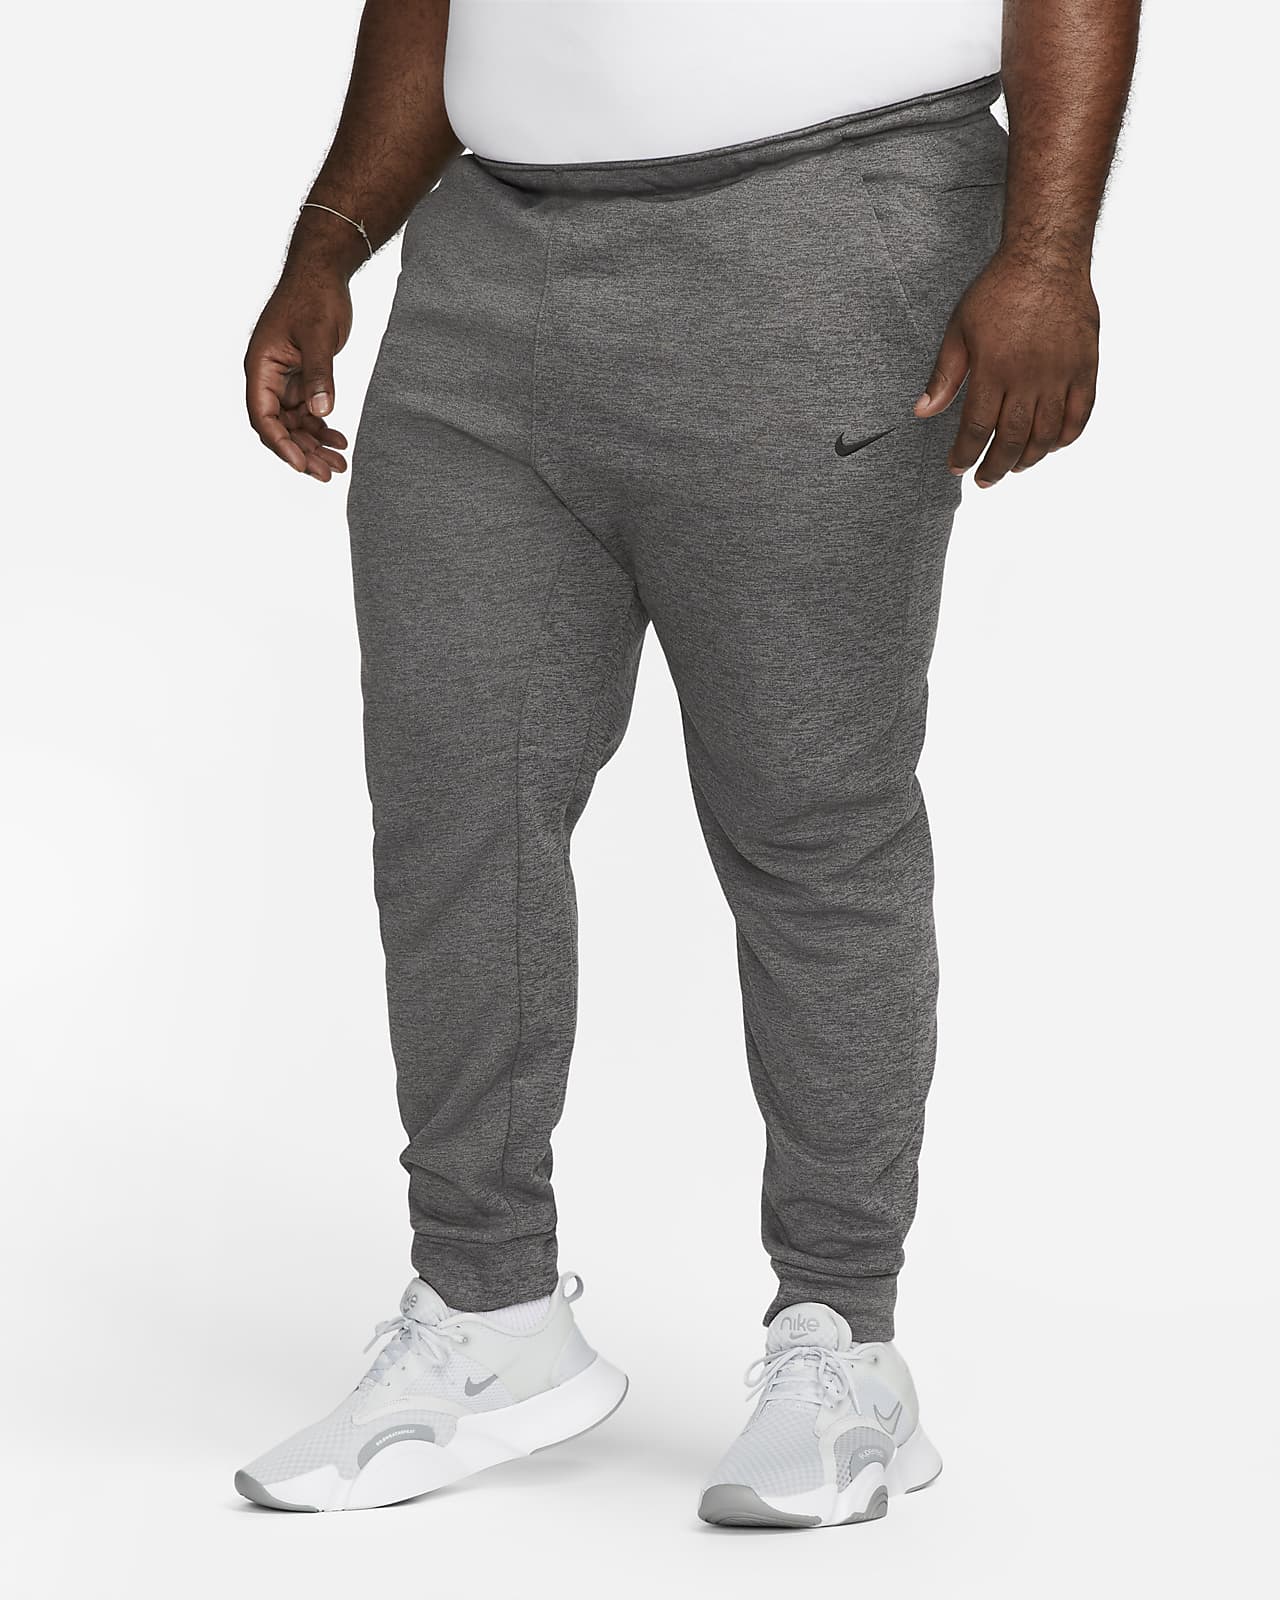 Nike Therma-FIT Men's Tapered Fitness Pants.